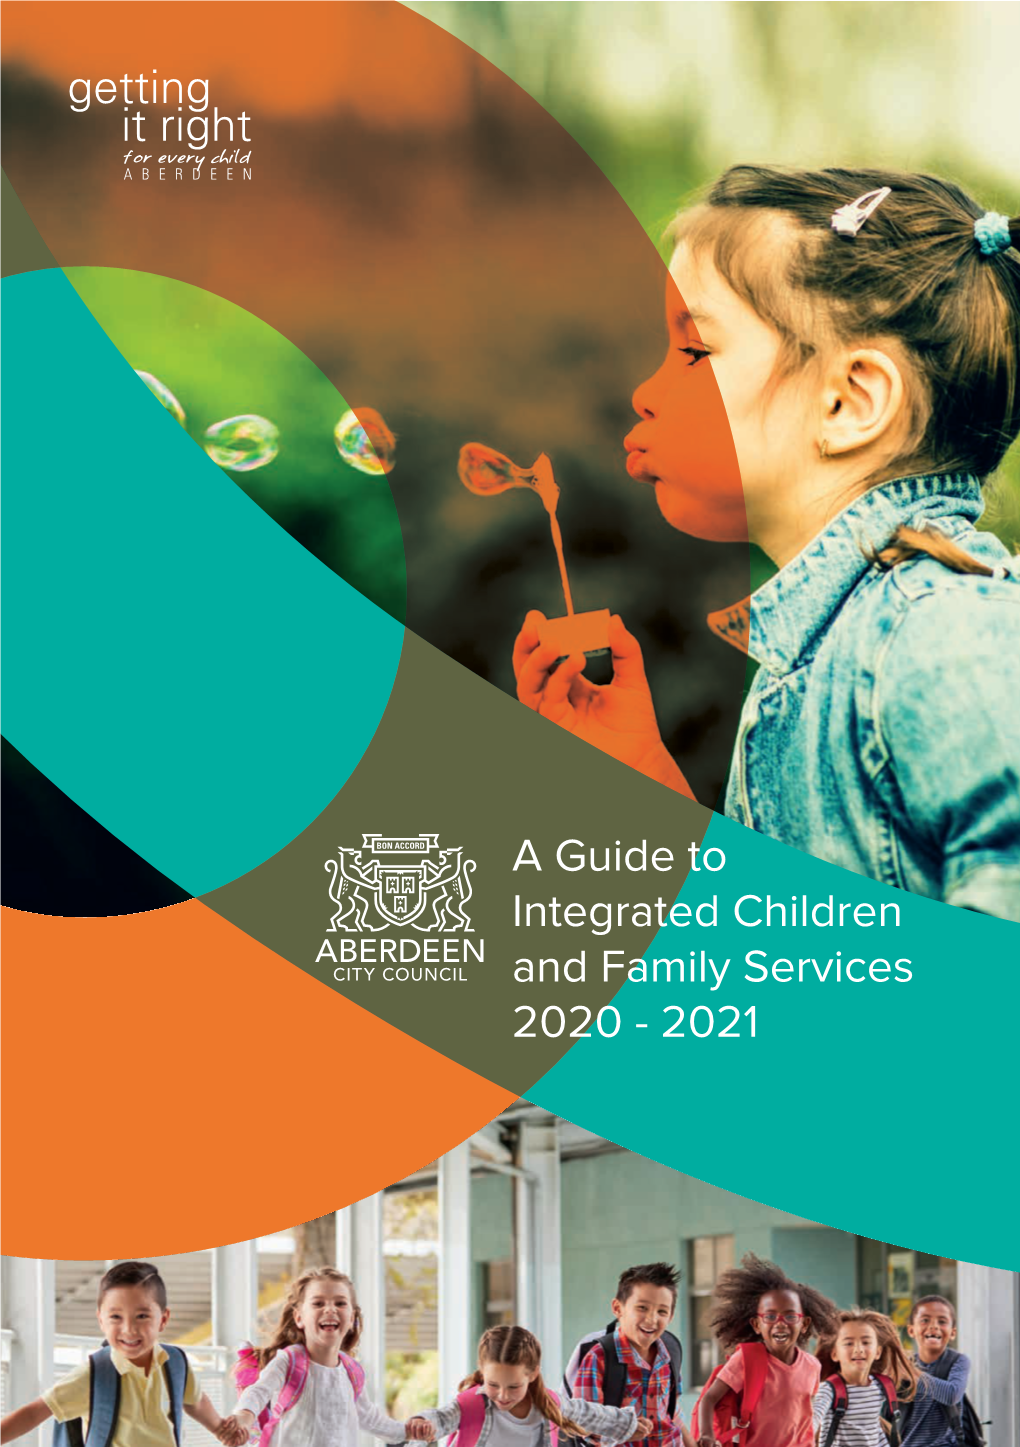 A Guide to Integrated Children and Family